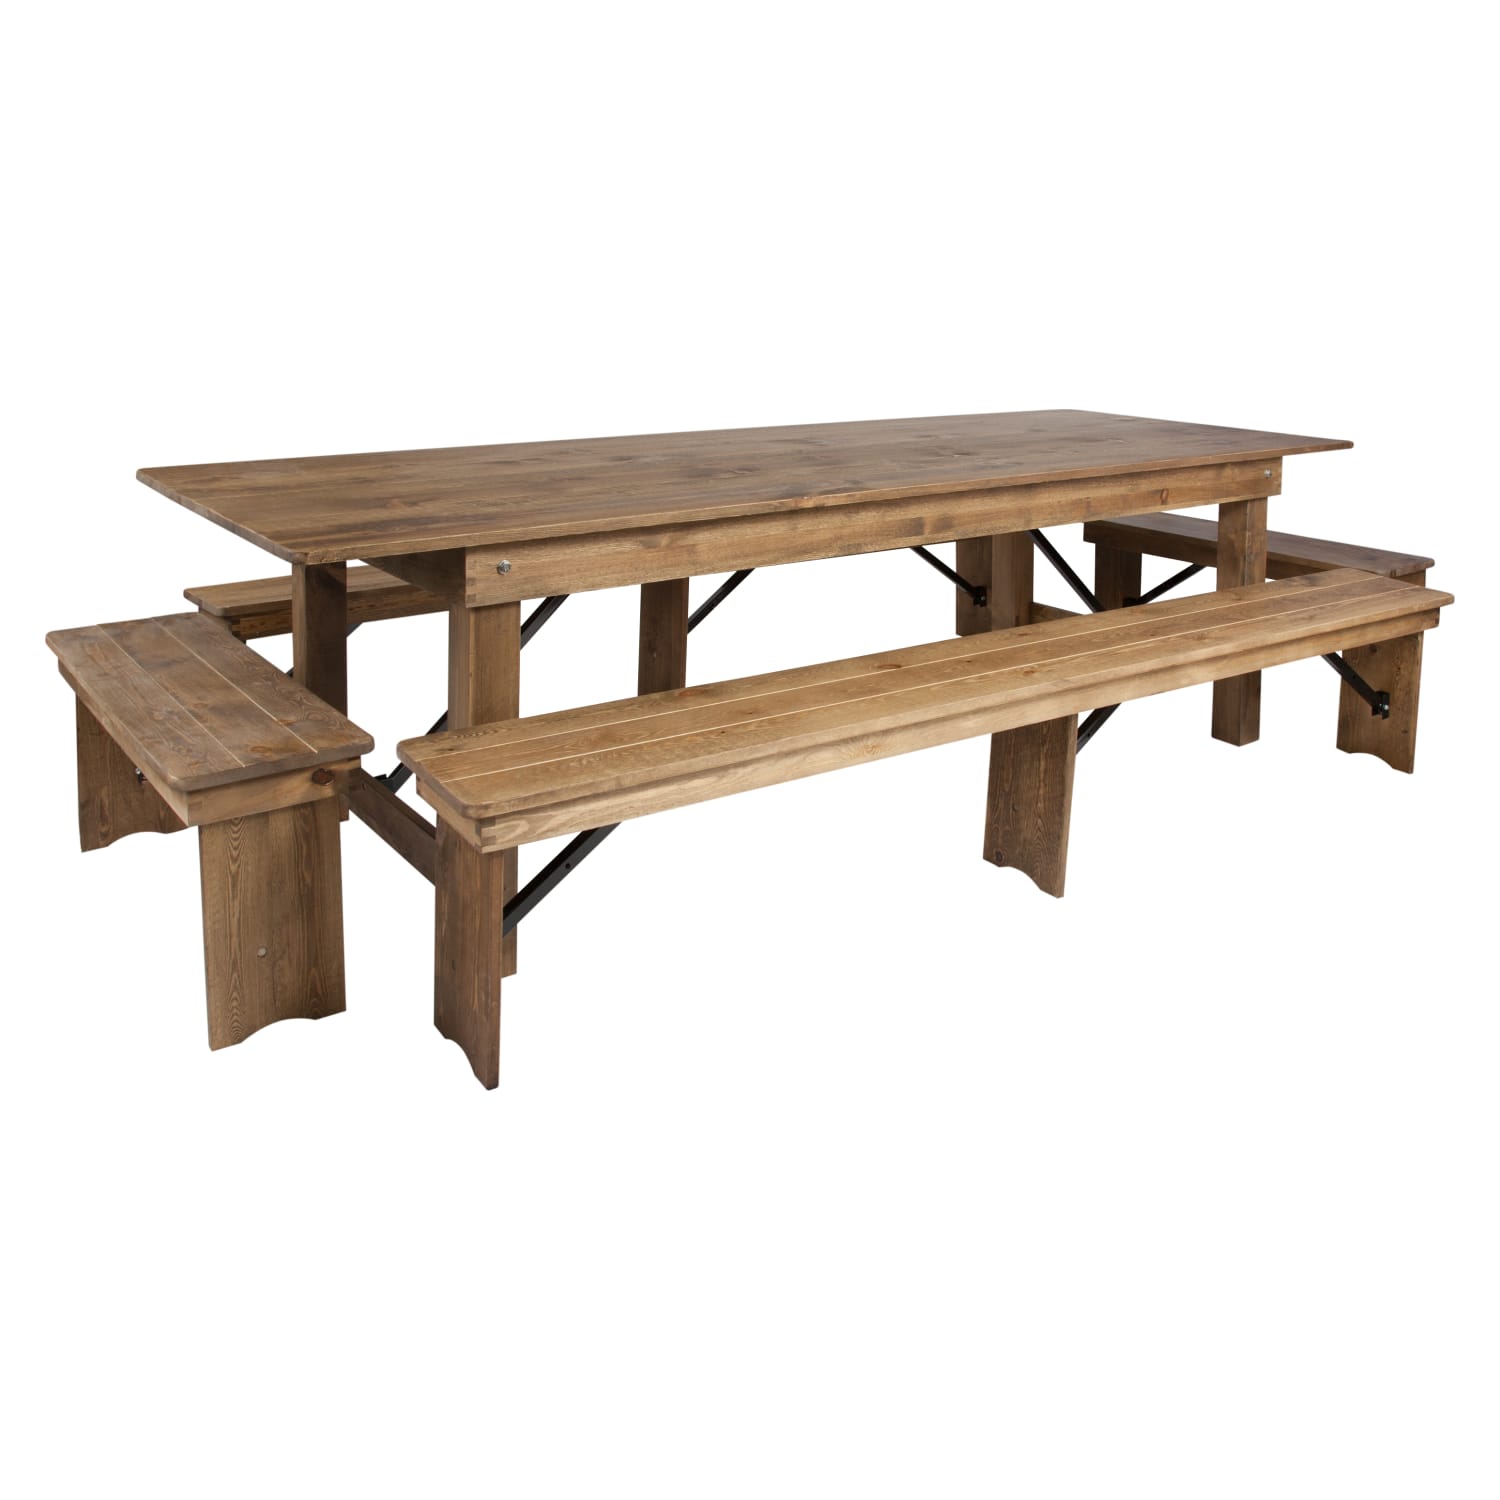 HERCULES Series 9' x 40” Antique Rustic Folding Farm Table and Four Bench Set